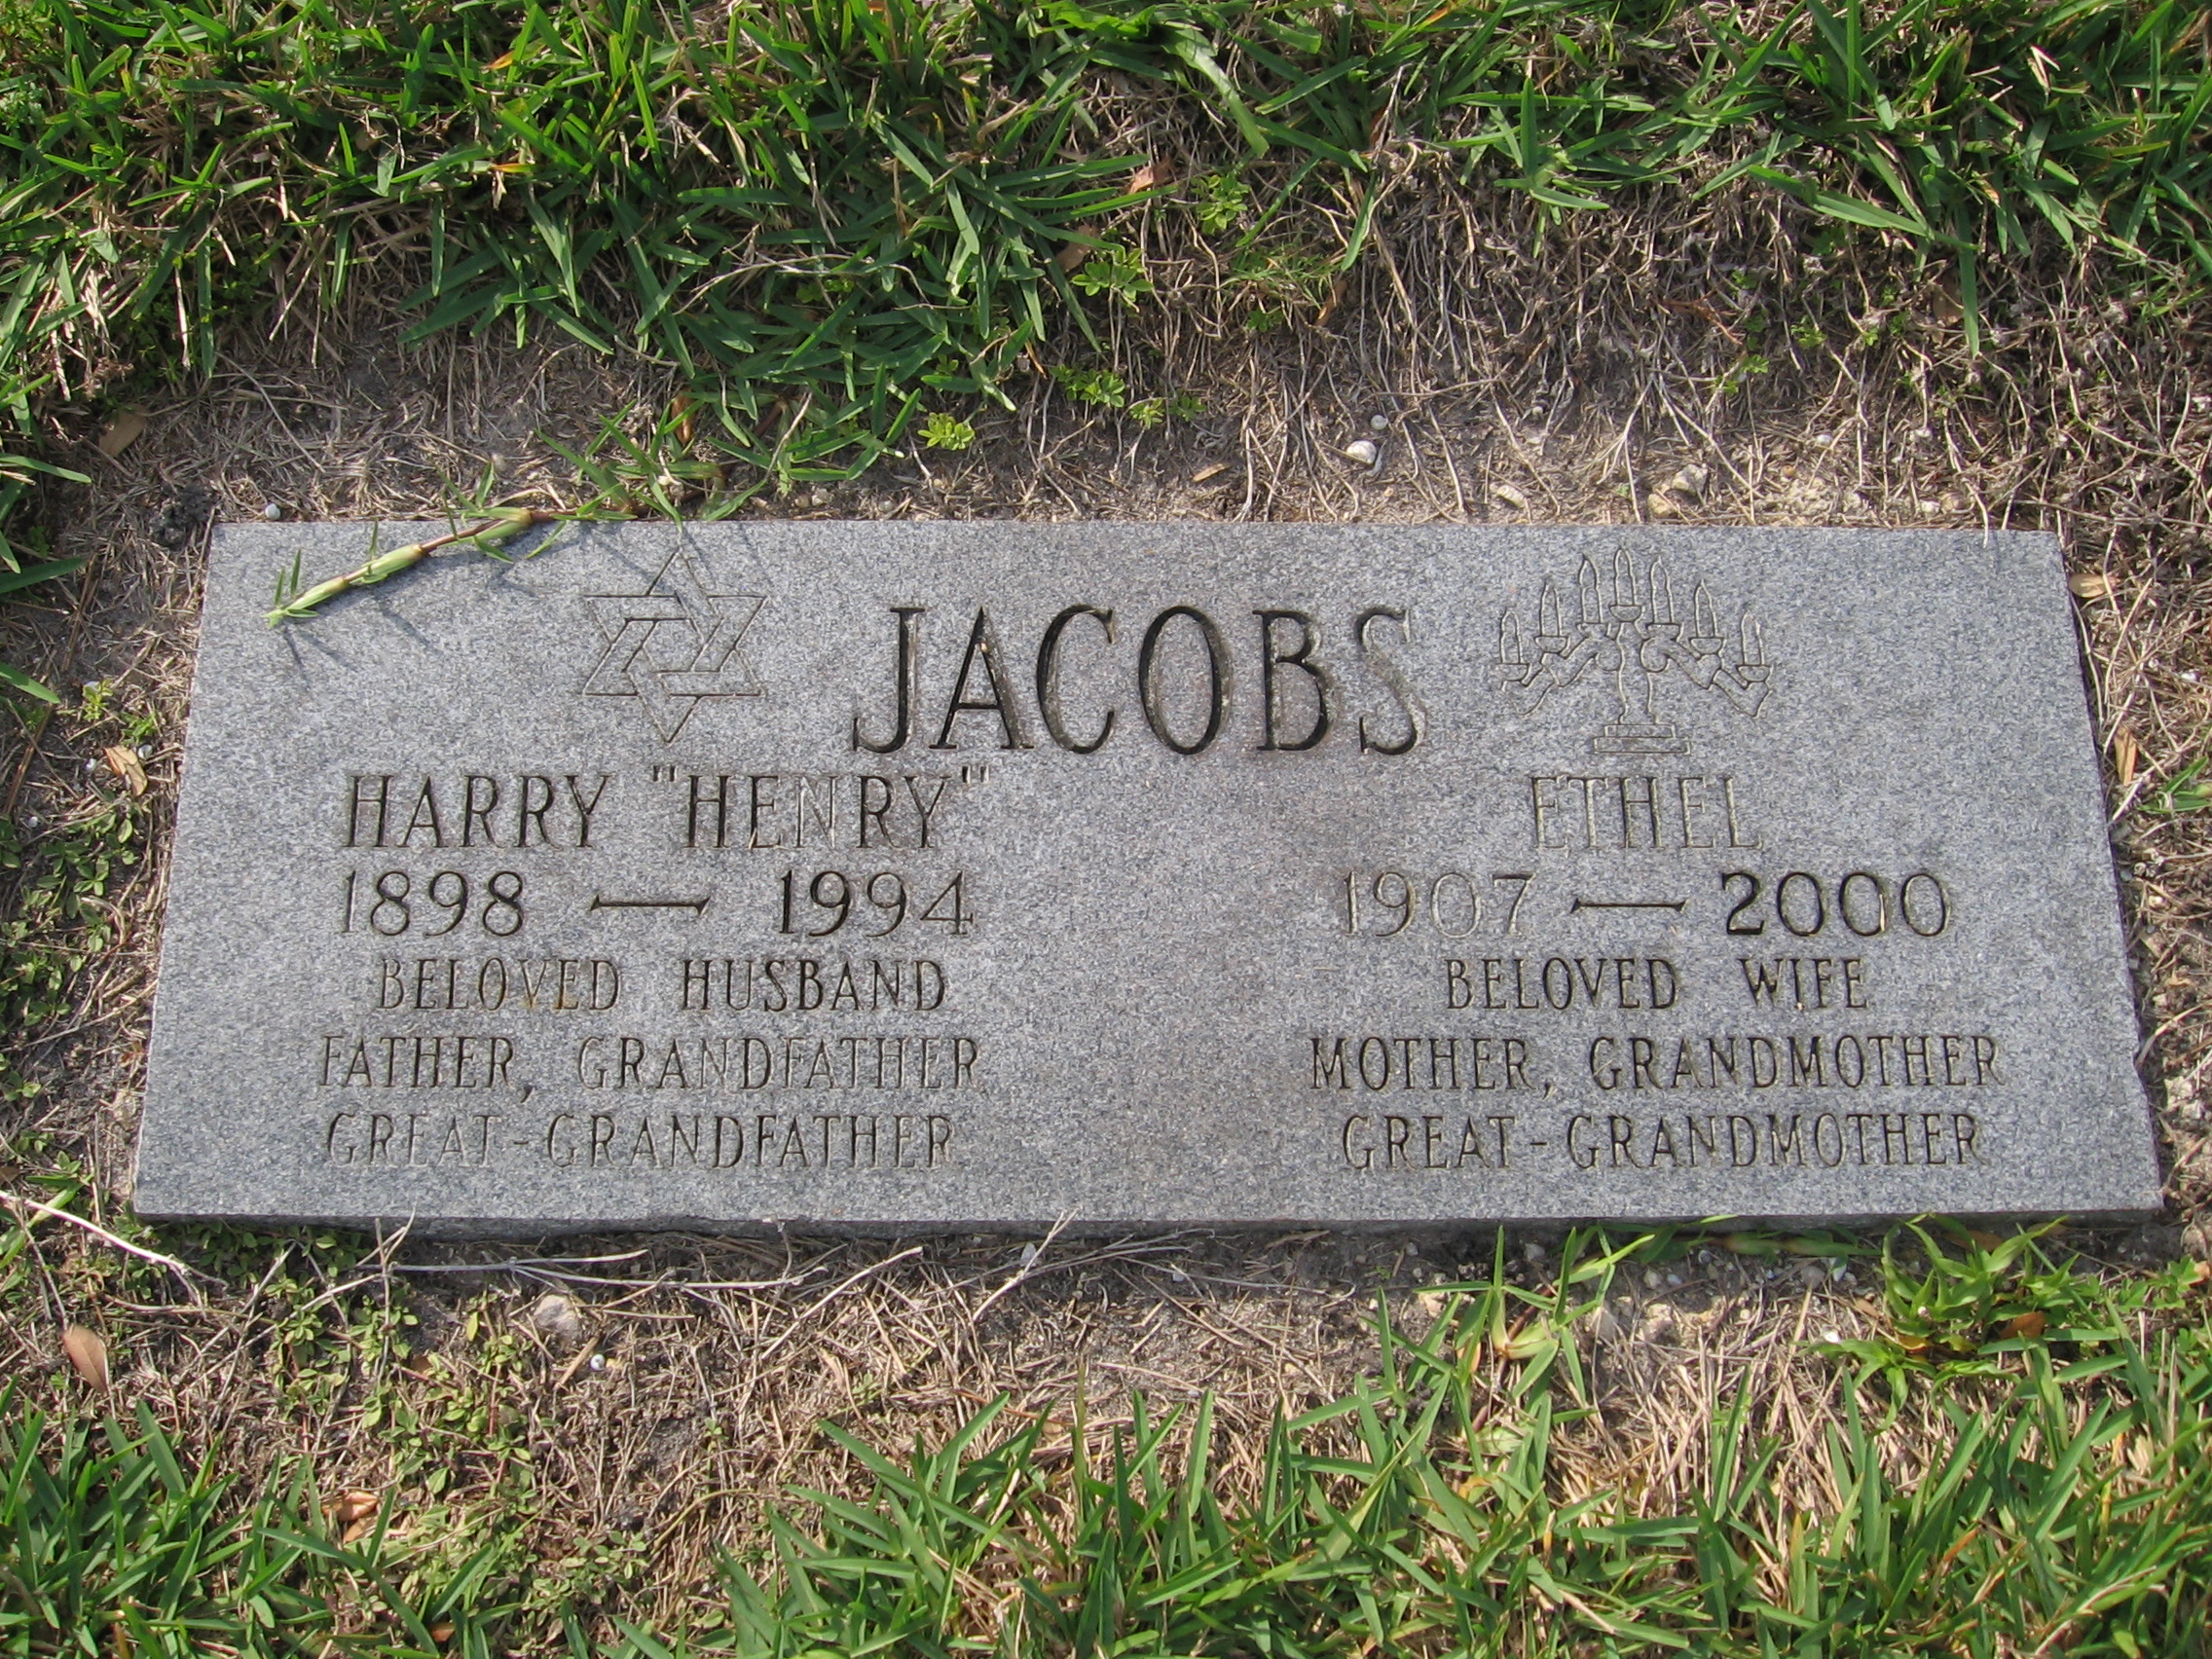 Harry "Henry" Jacobs